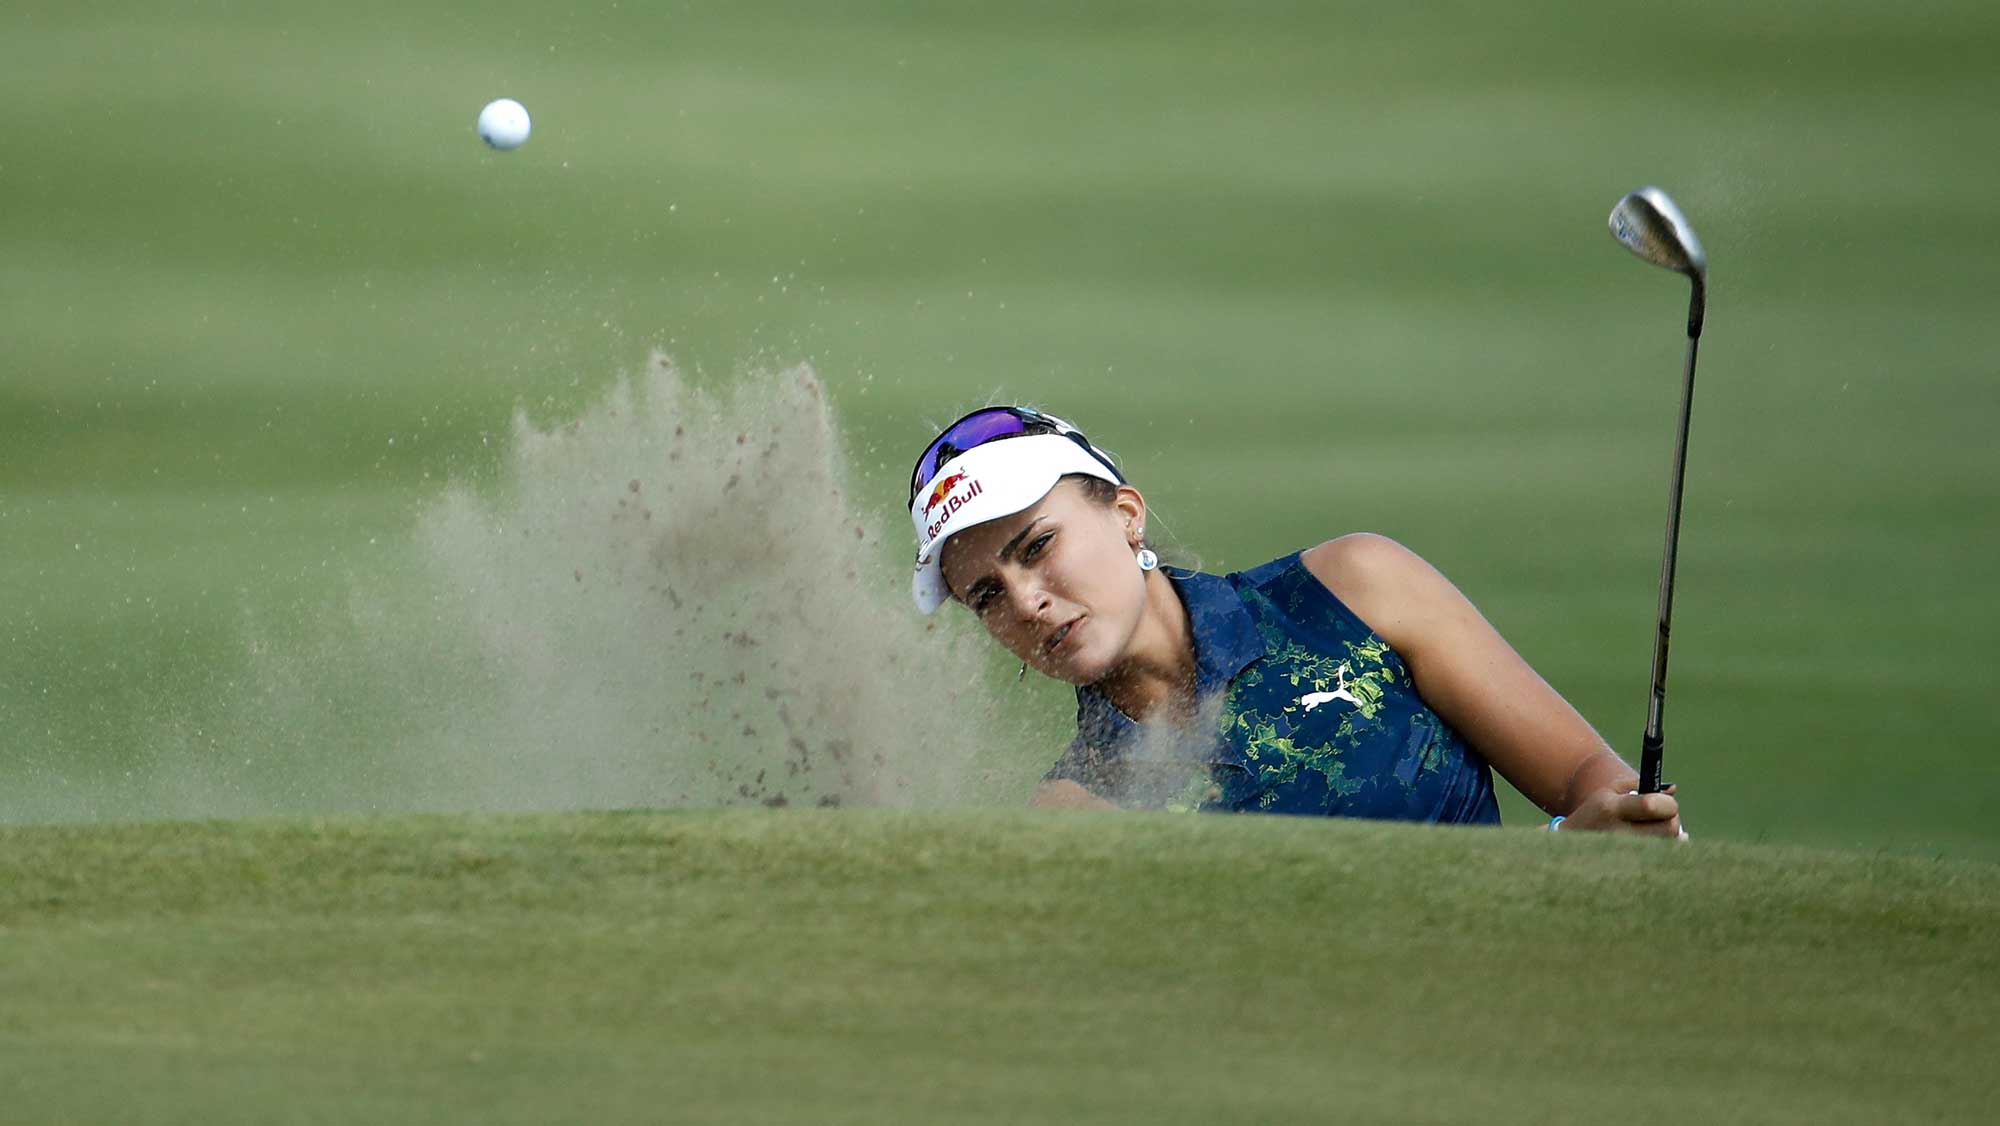 Lexi Thompson hits her third shot on the 8th hole during the final round of the Indy Women In Tech Championship-Presented By Guggenheim